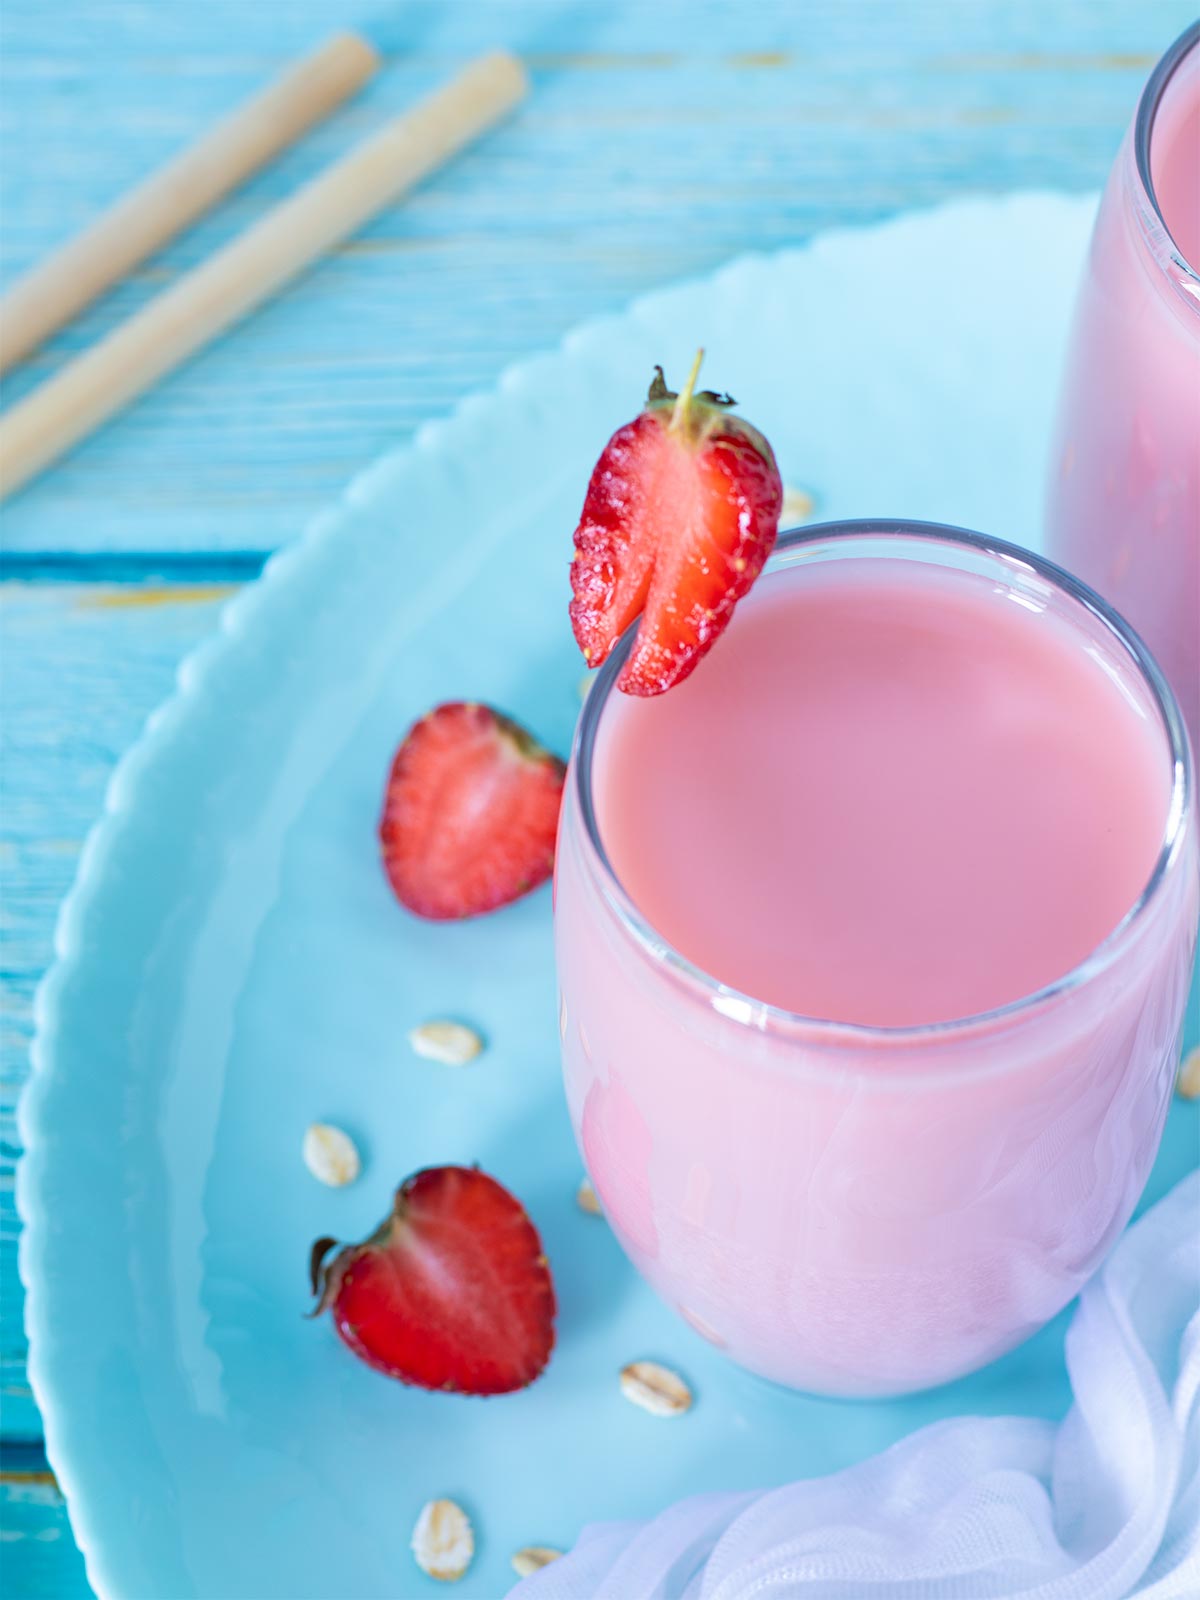 Homemade strawberry oat milk in a glass